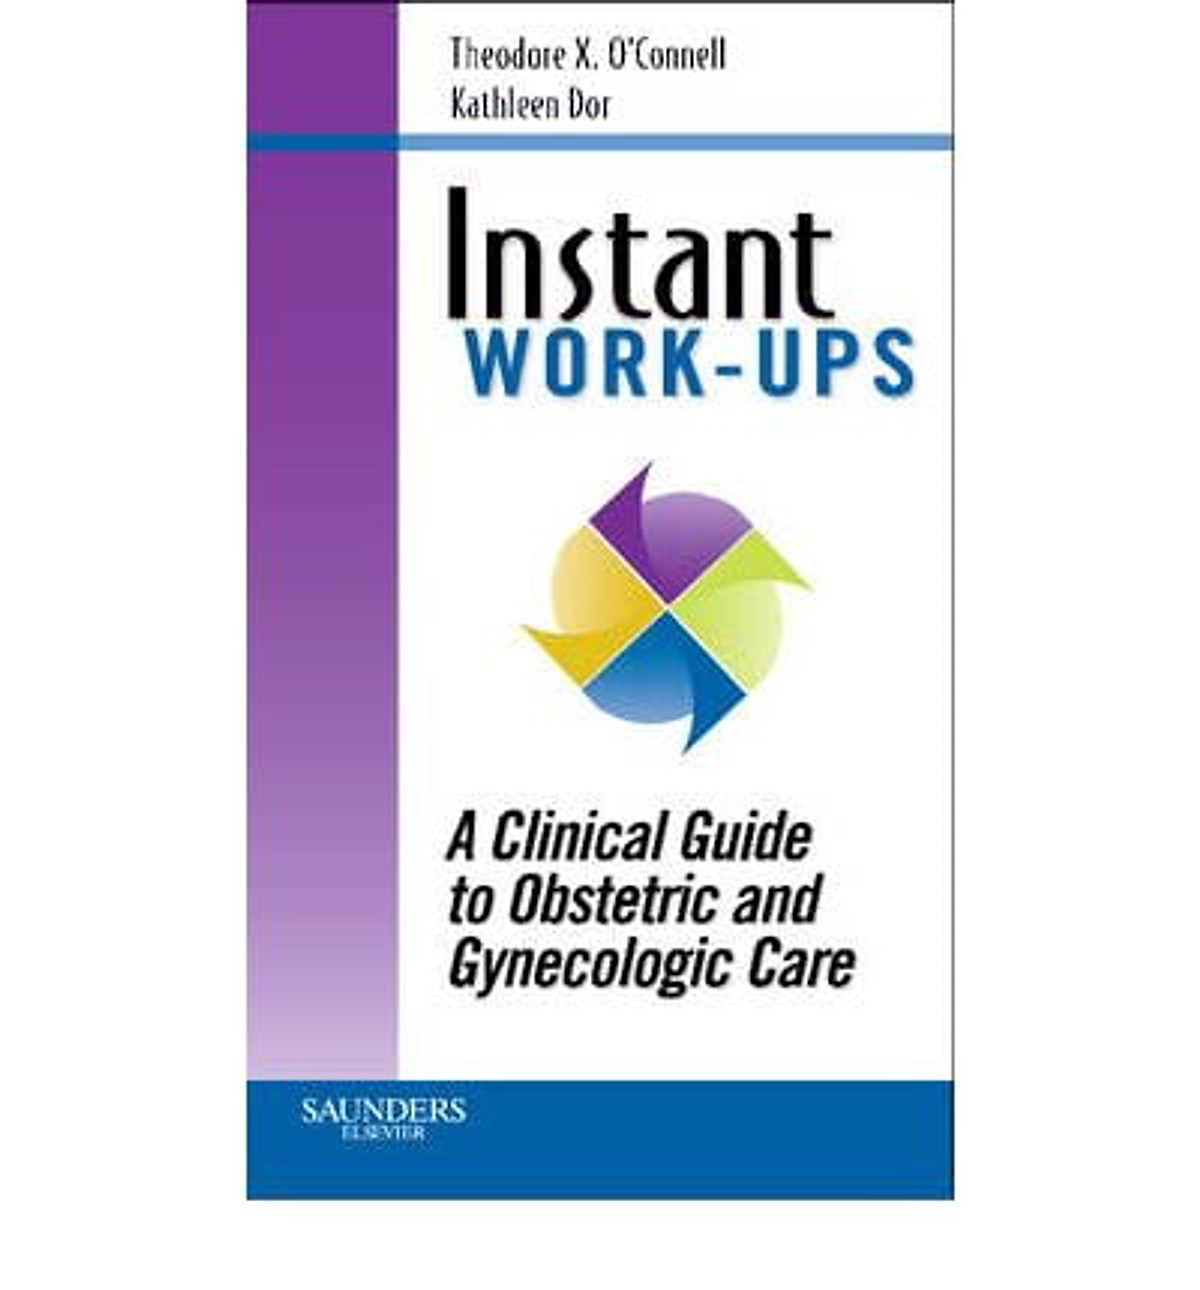 A Clinical Guide to Obstetric and Gynecologic Care